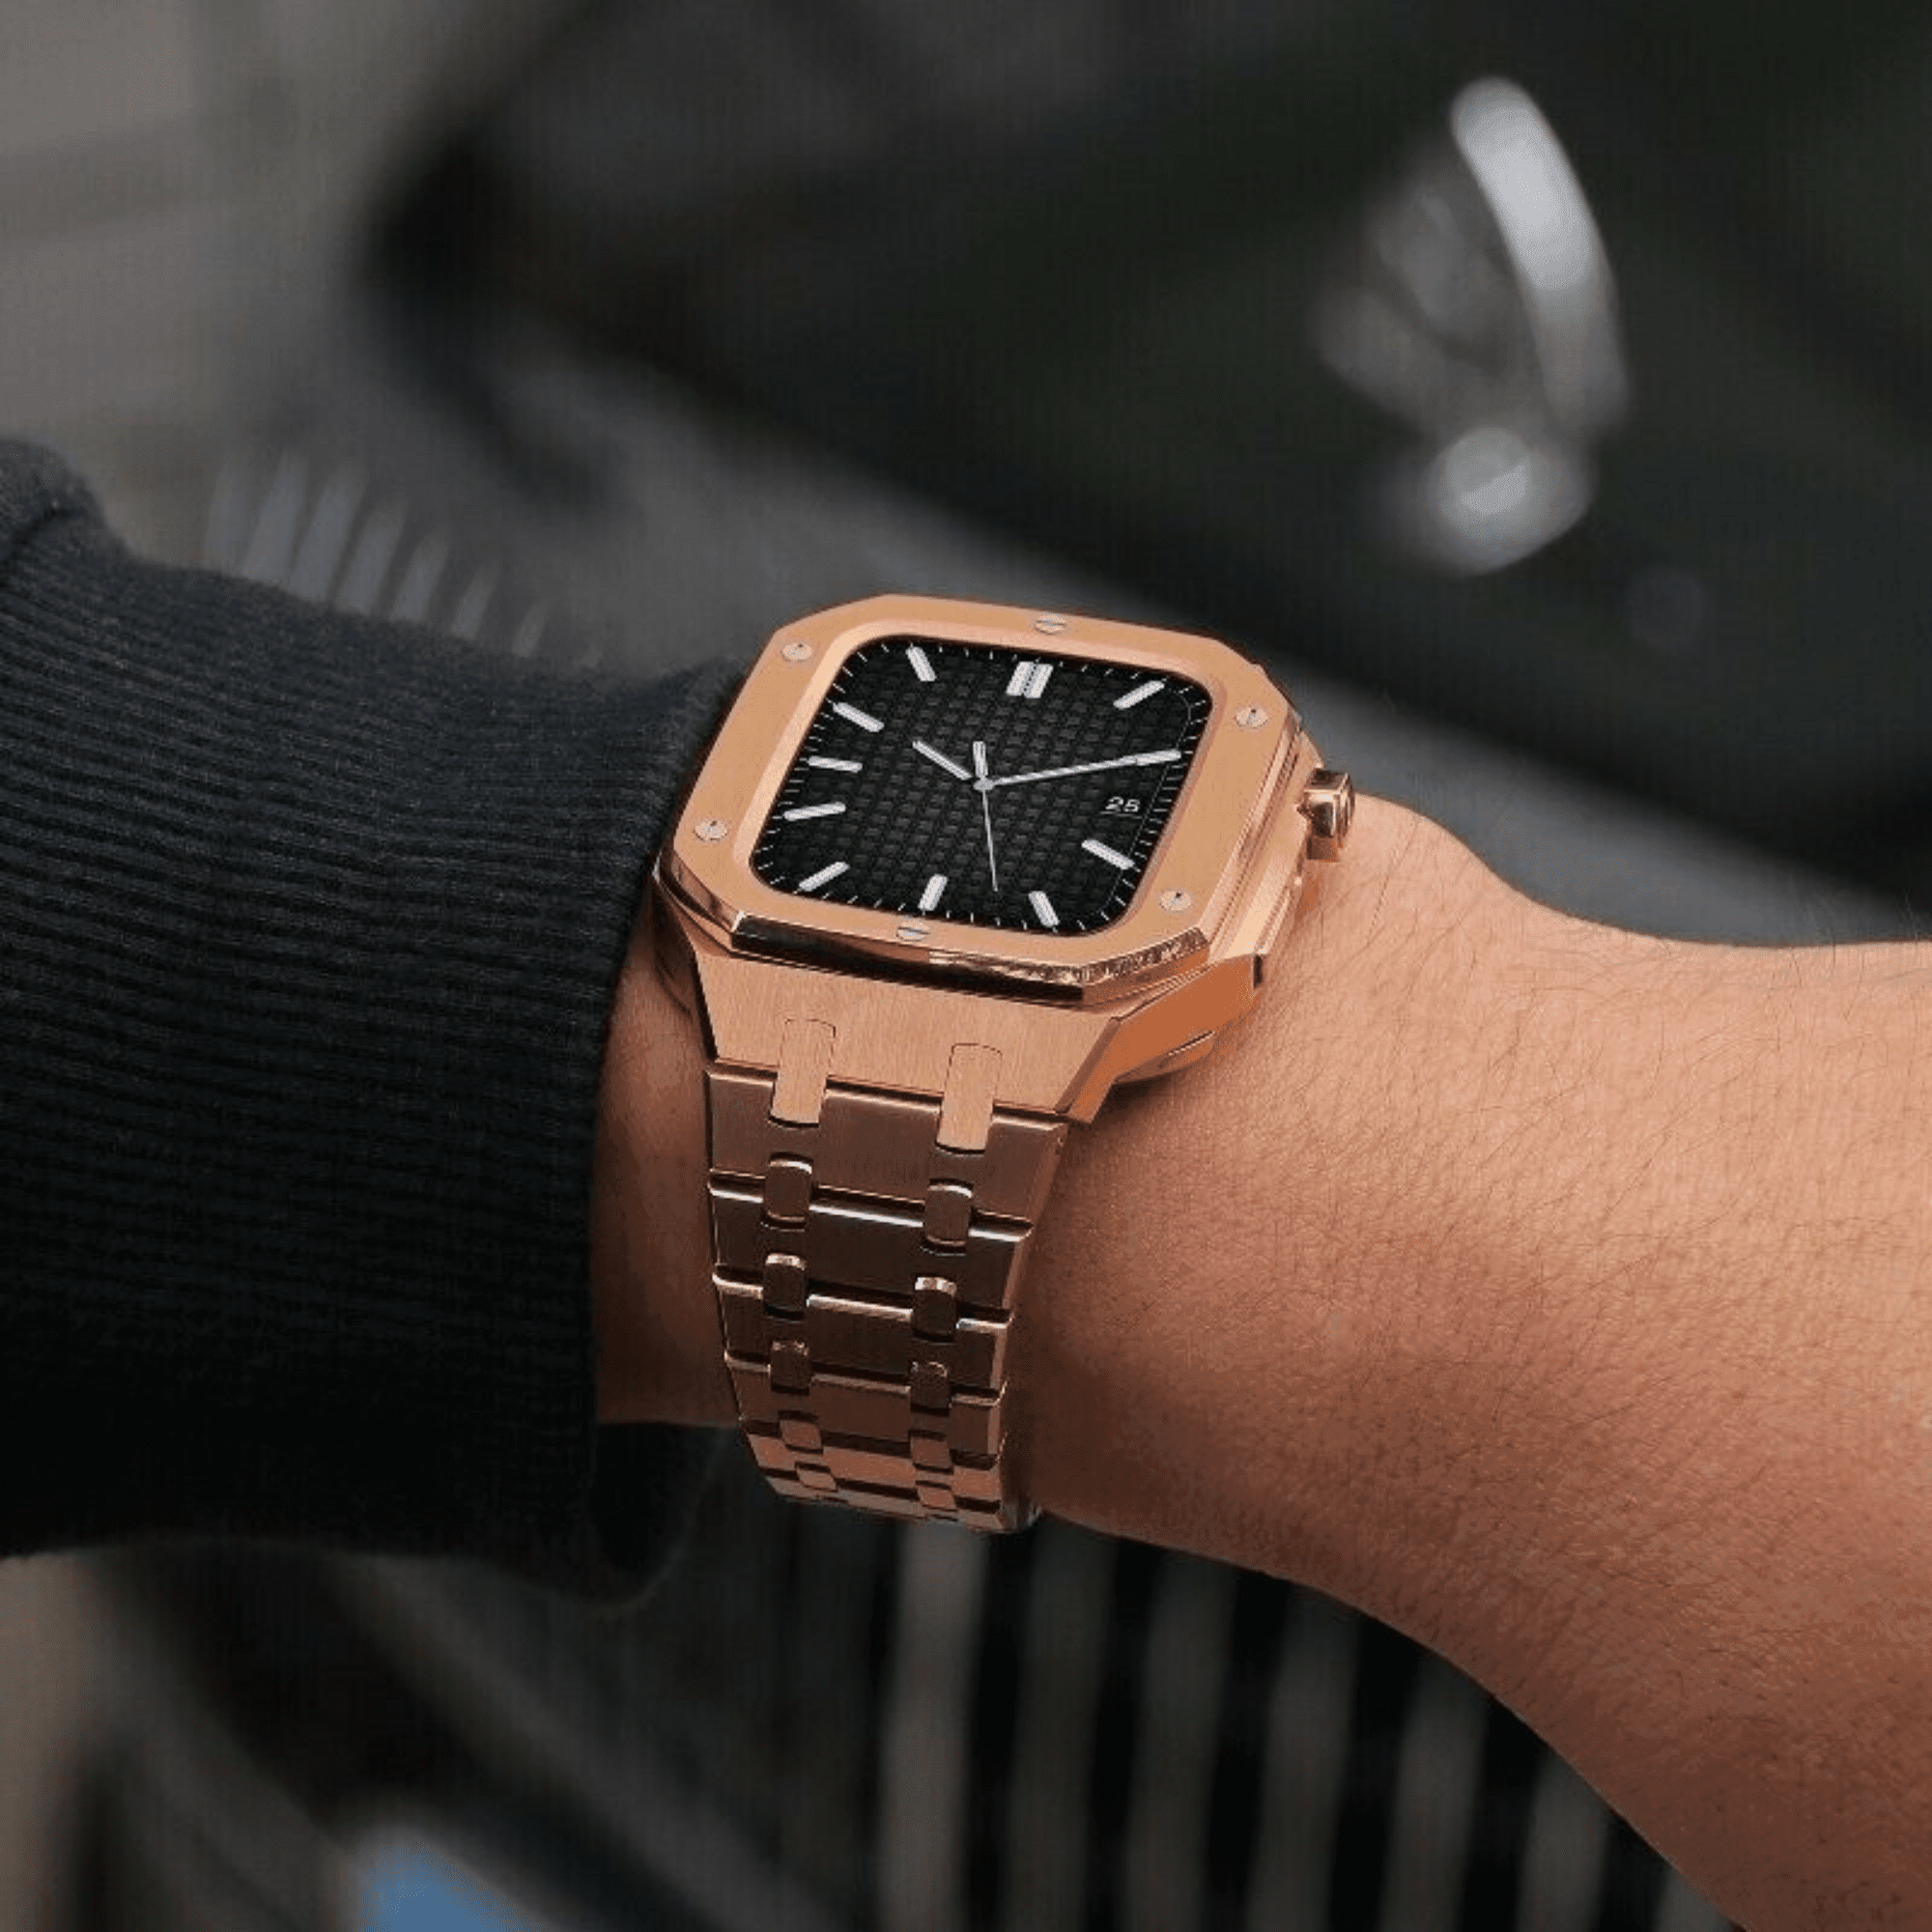 Luxury Metal Mod Kit for Apple Watch | Leather & Stainless Steel Straps | Apple Watch SE/3/4/5/6/7/8 accessory 45 mm| Rosè Gold Case - Rosè Gold Band mod kits india dream watches apple watch